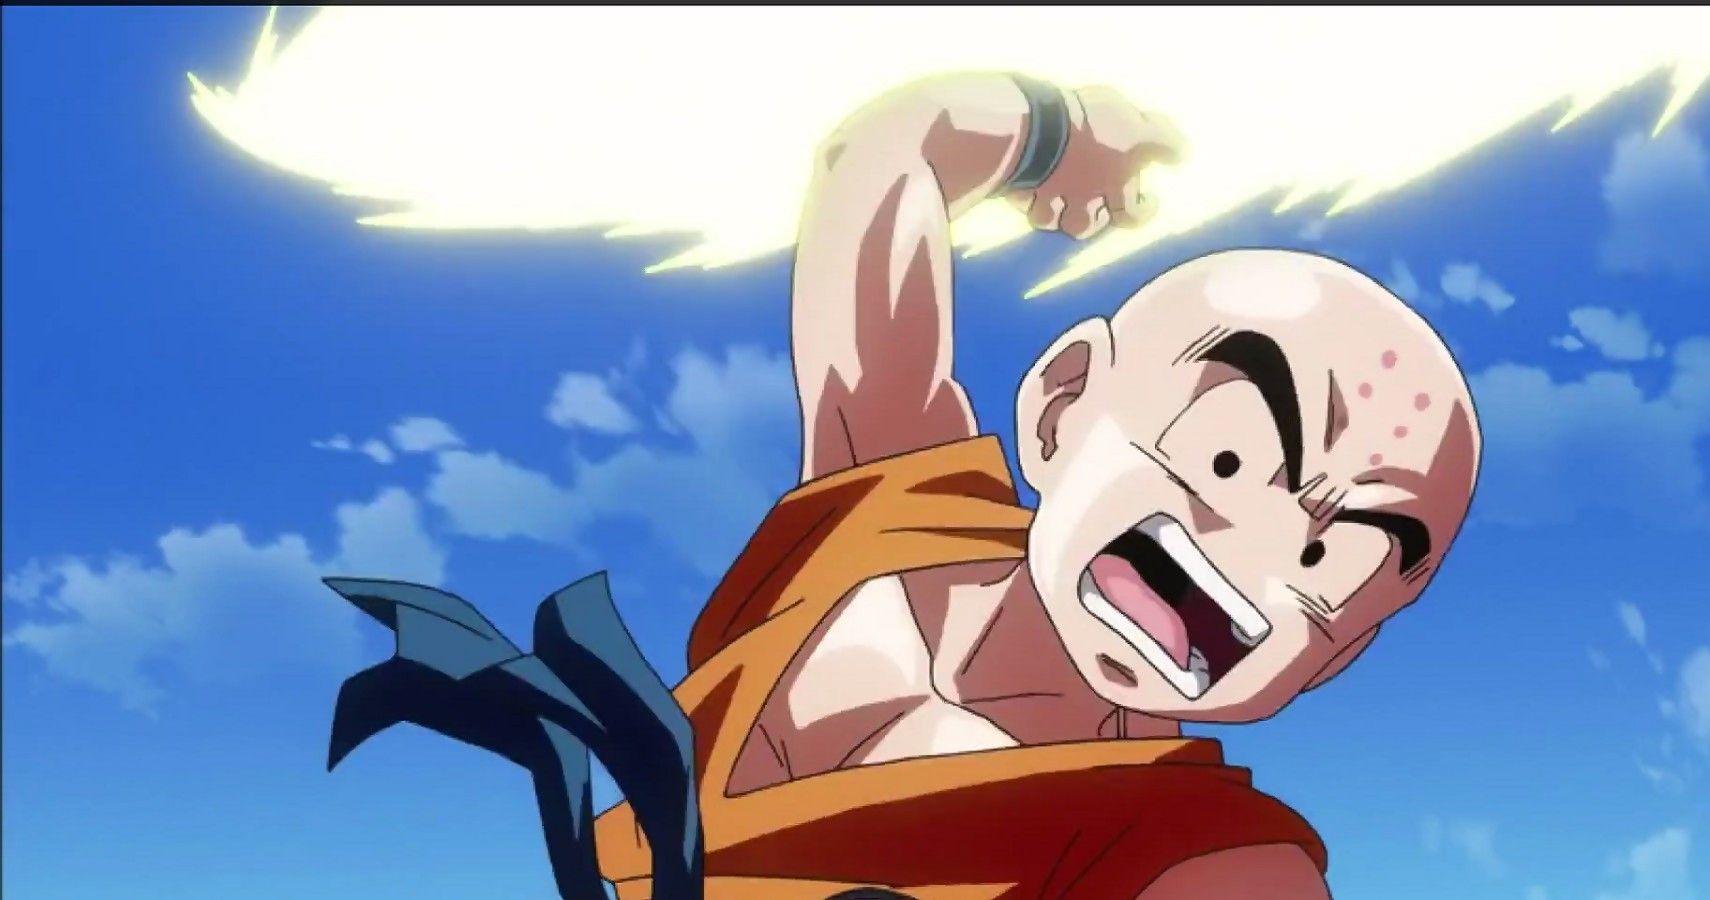 Why is Krillin so old in Dragon Ball GT? - Quora